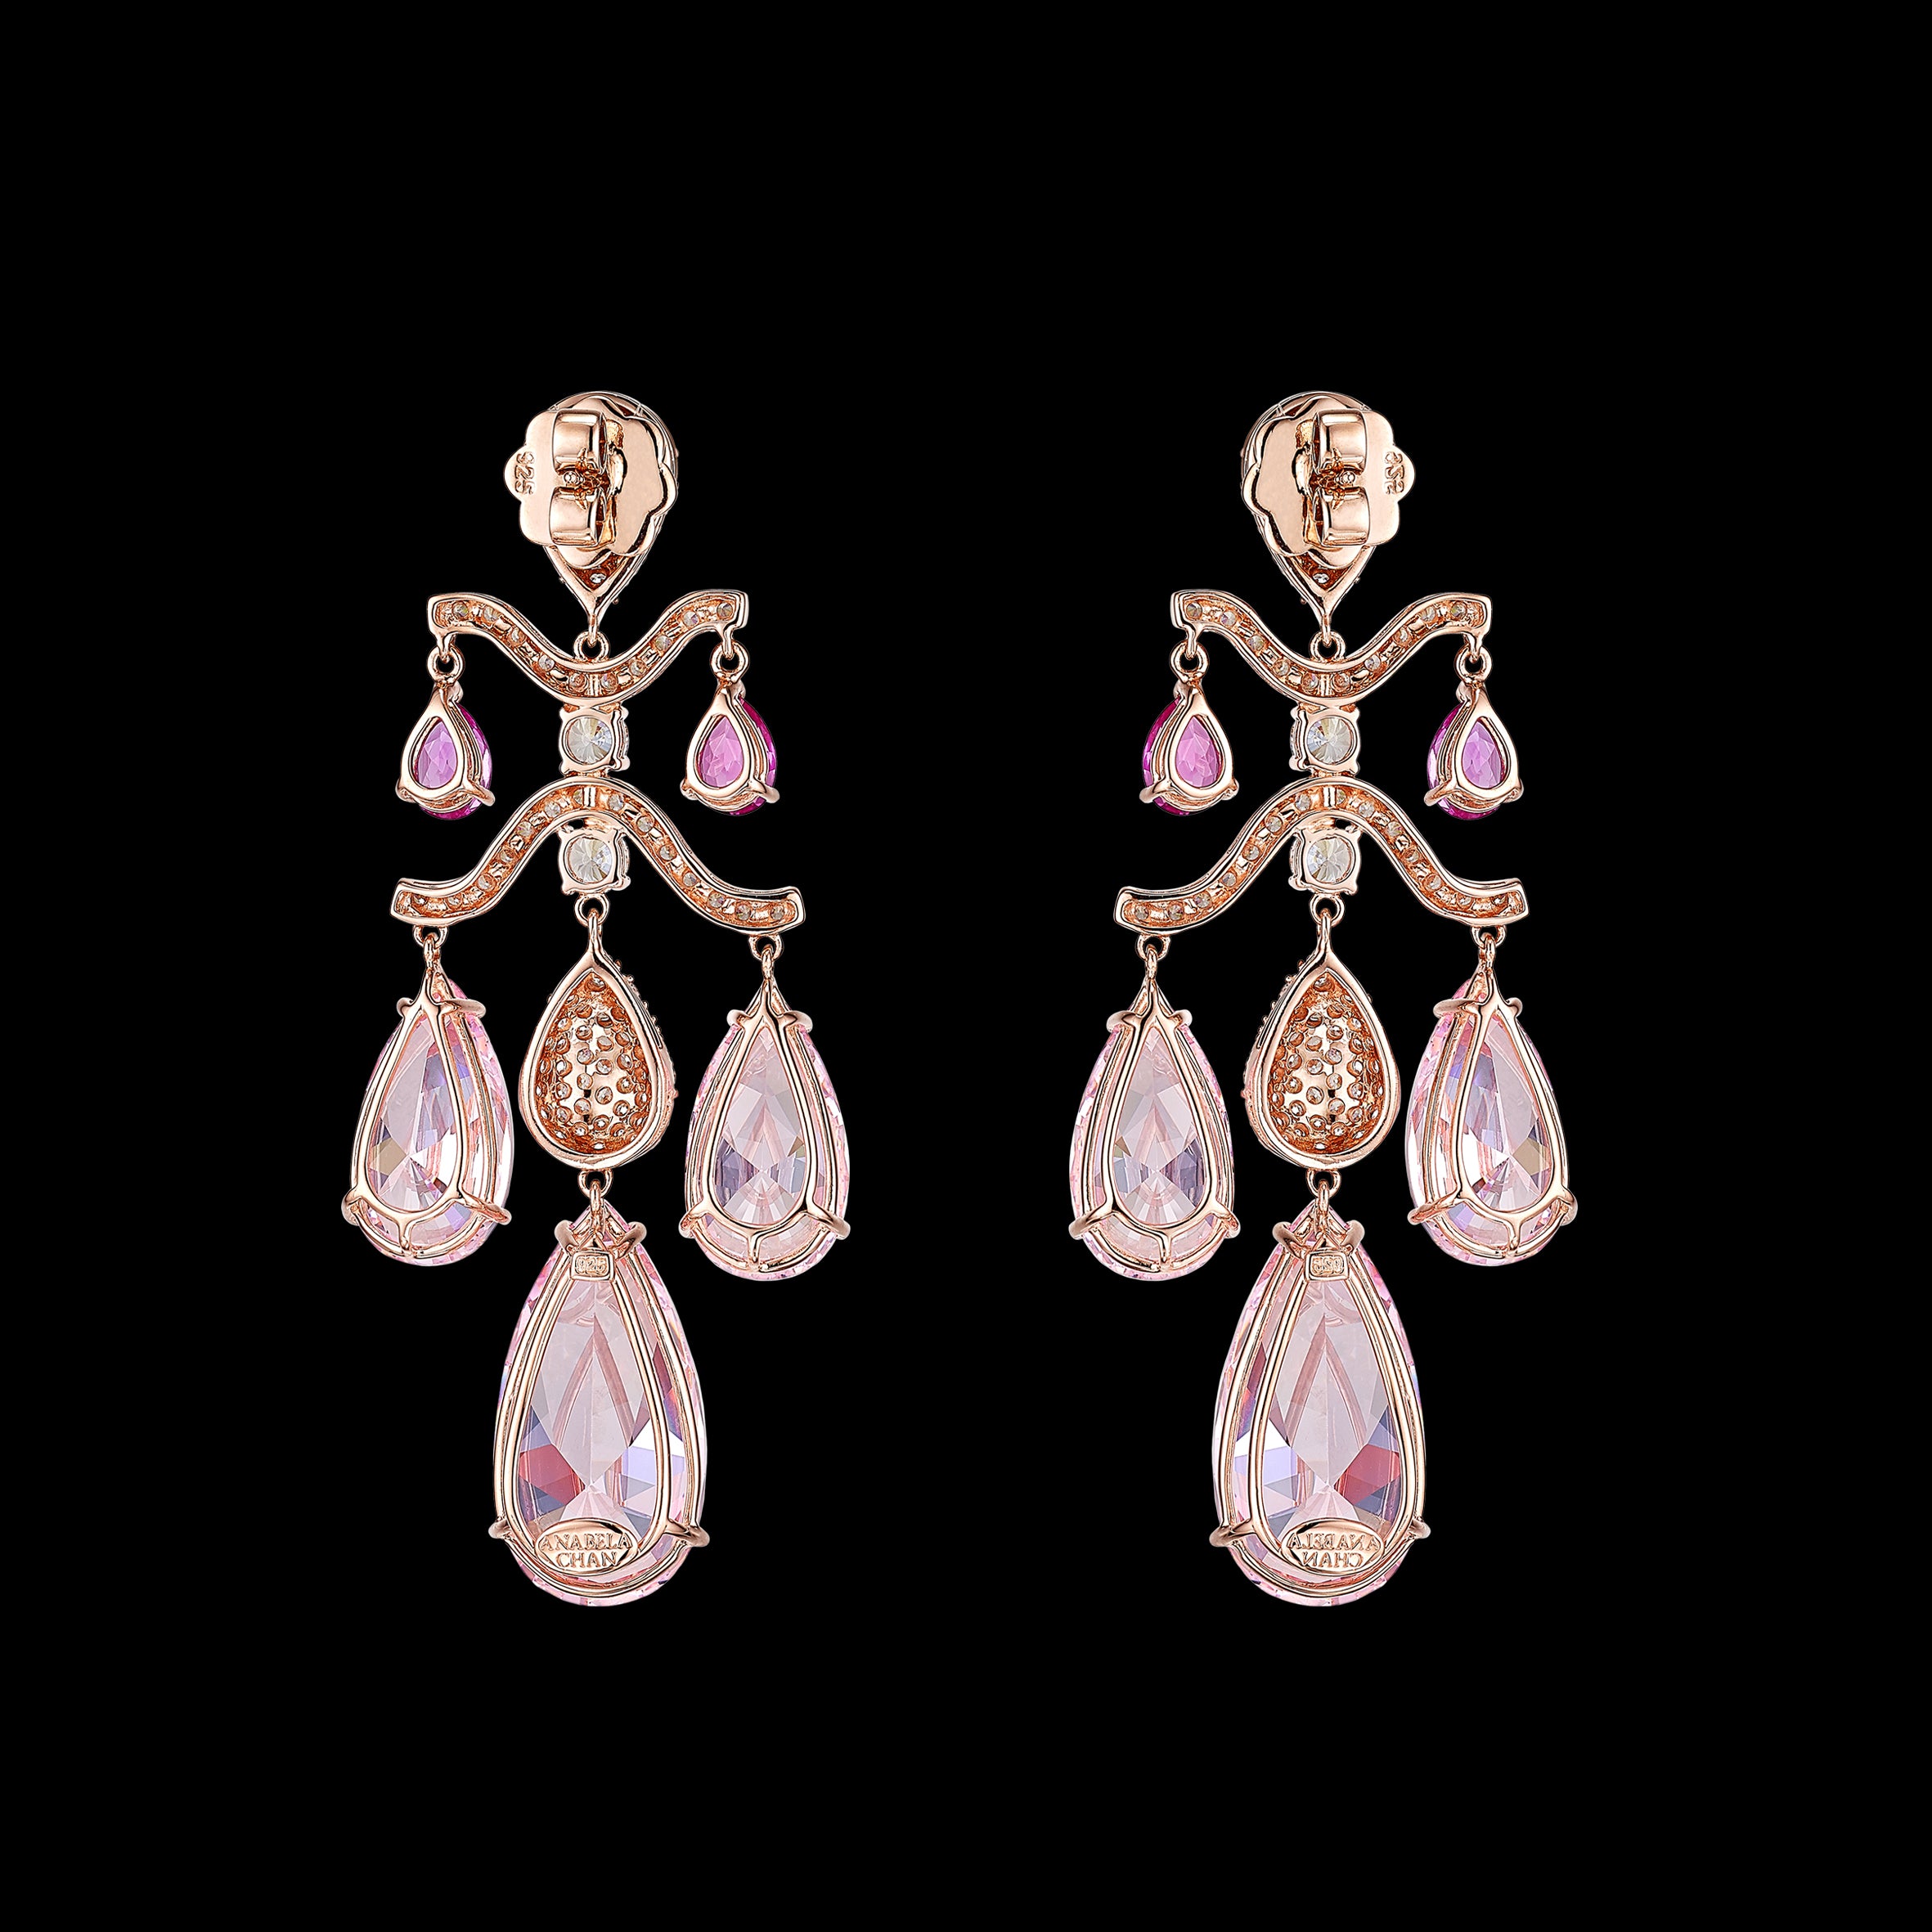 Pink Sapphire Earrings Rose Gold